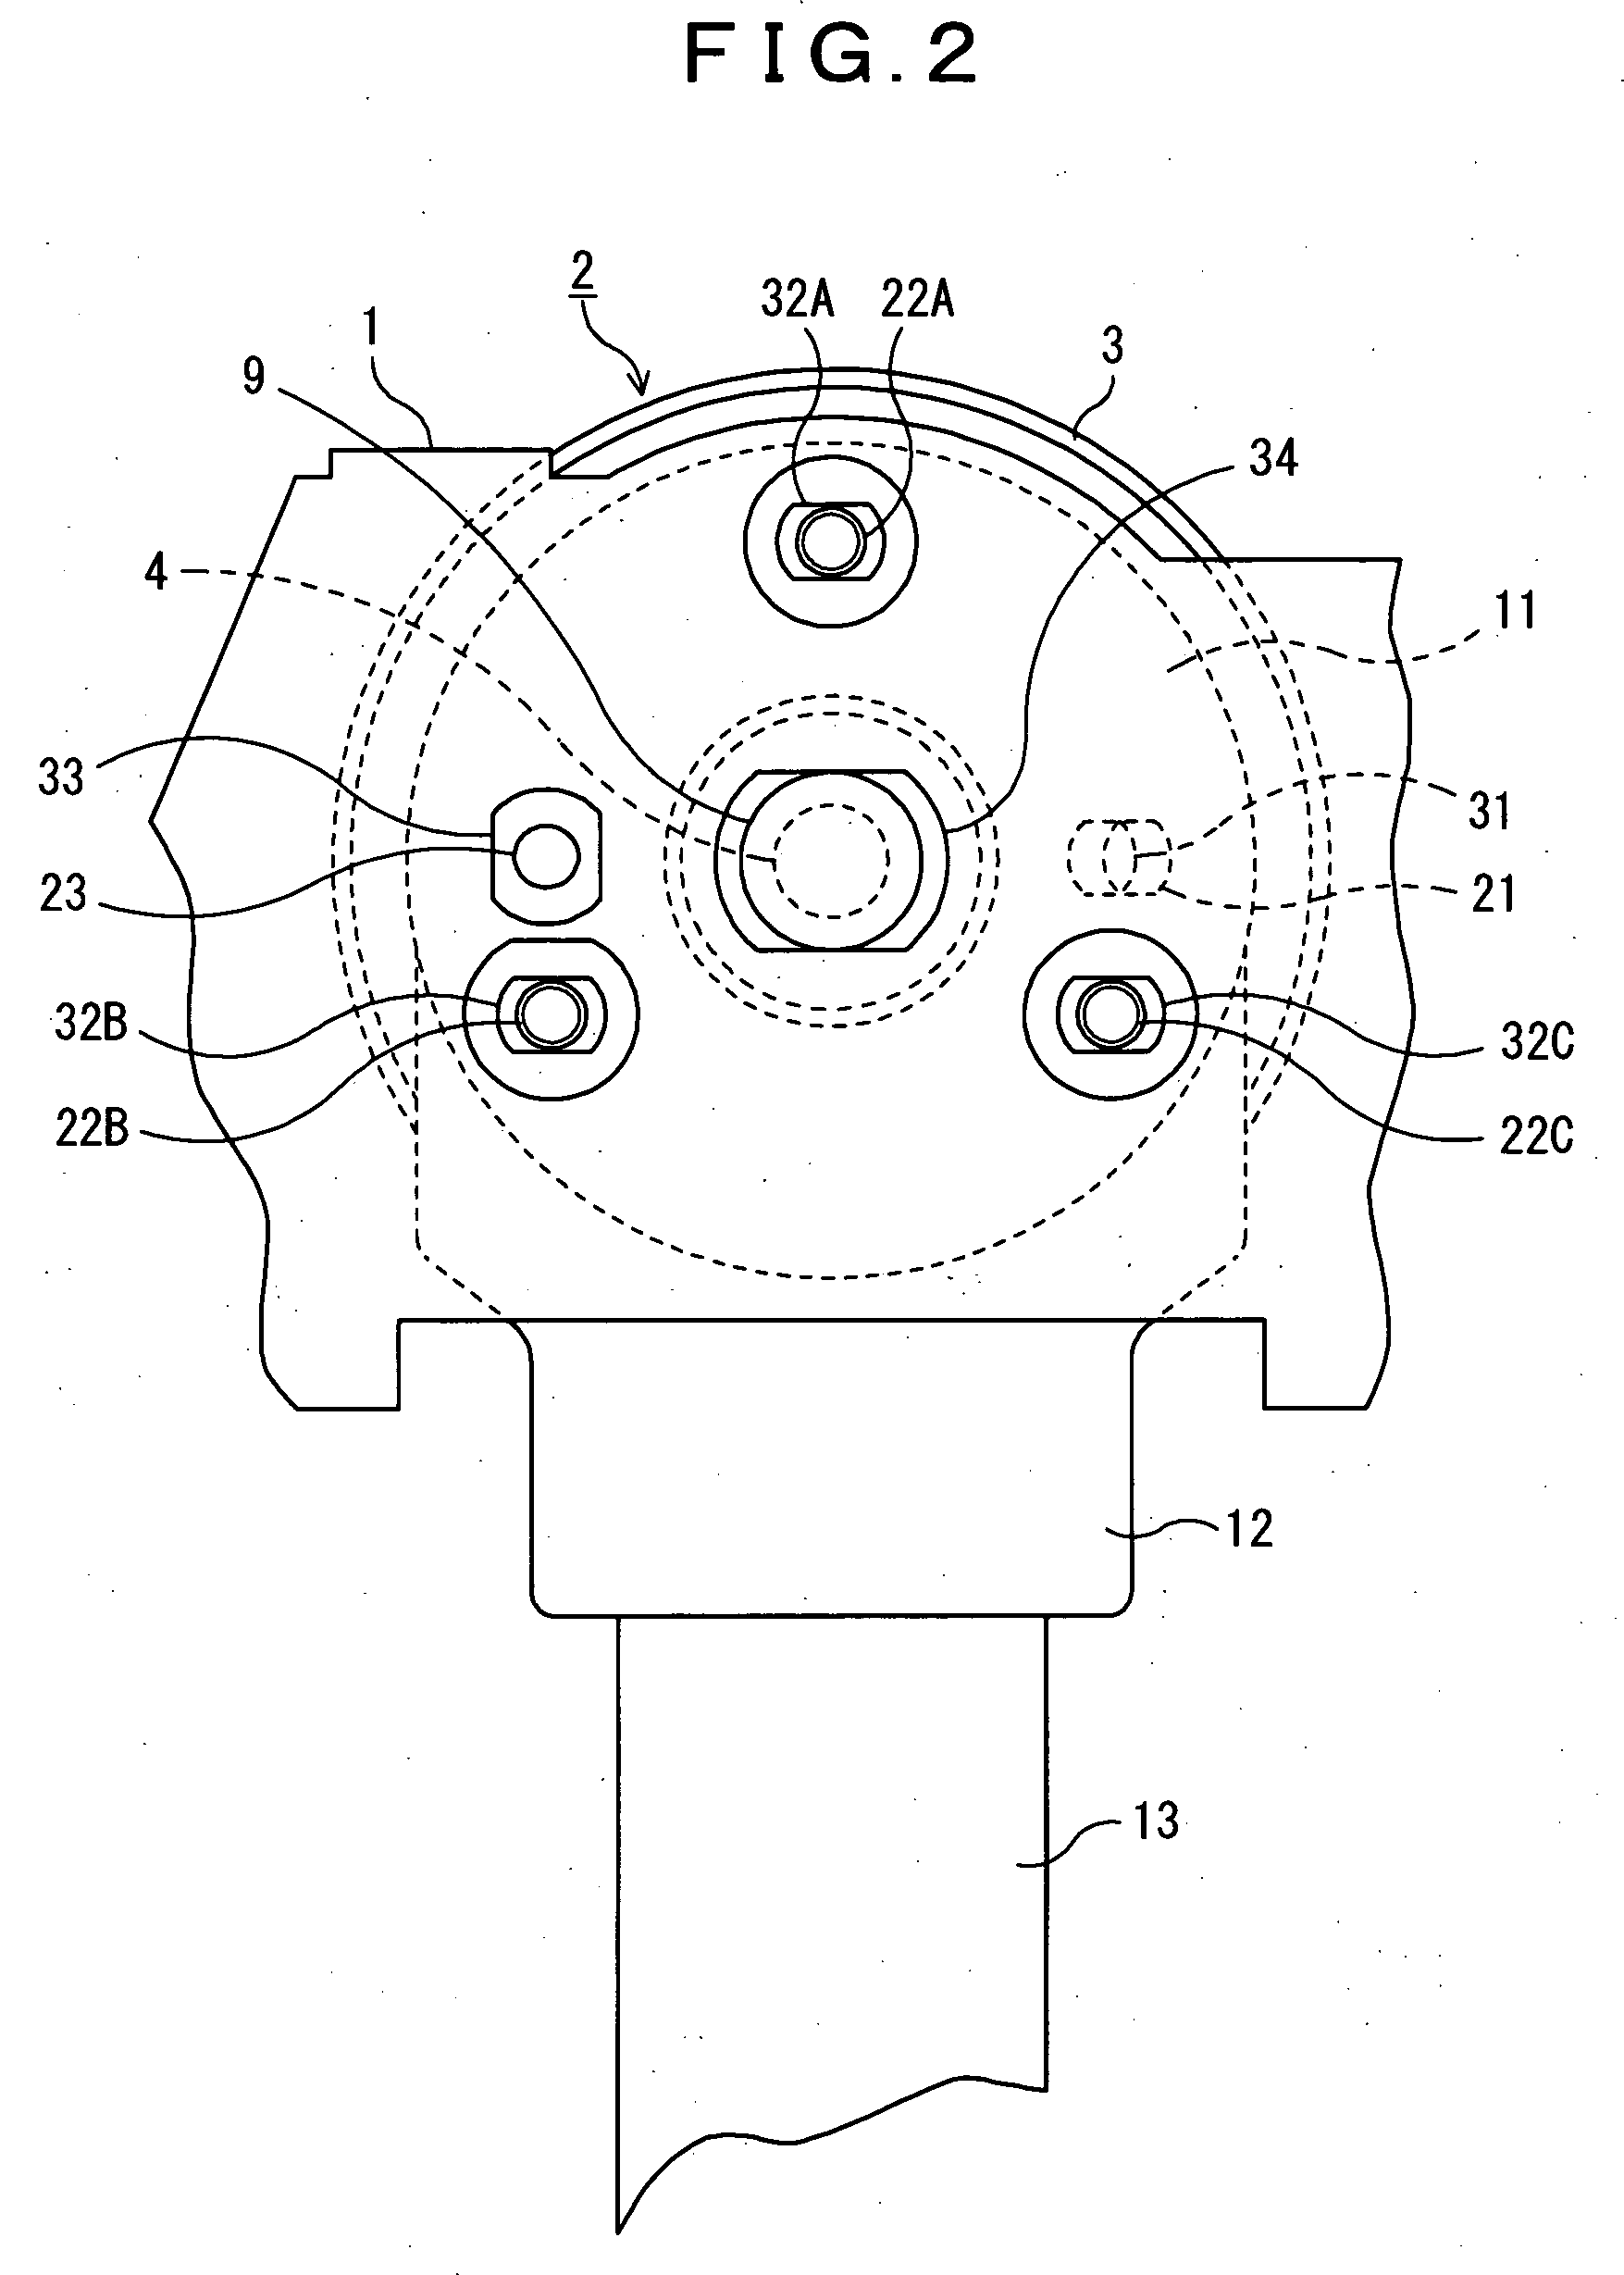 Structure for fixing spindle motor to traverse chassis